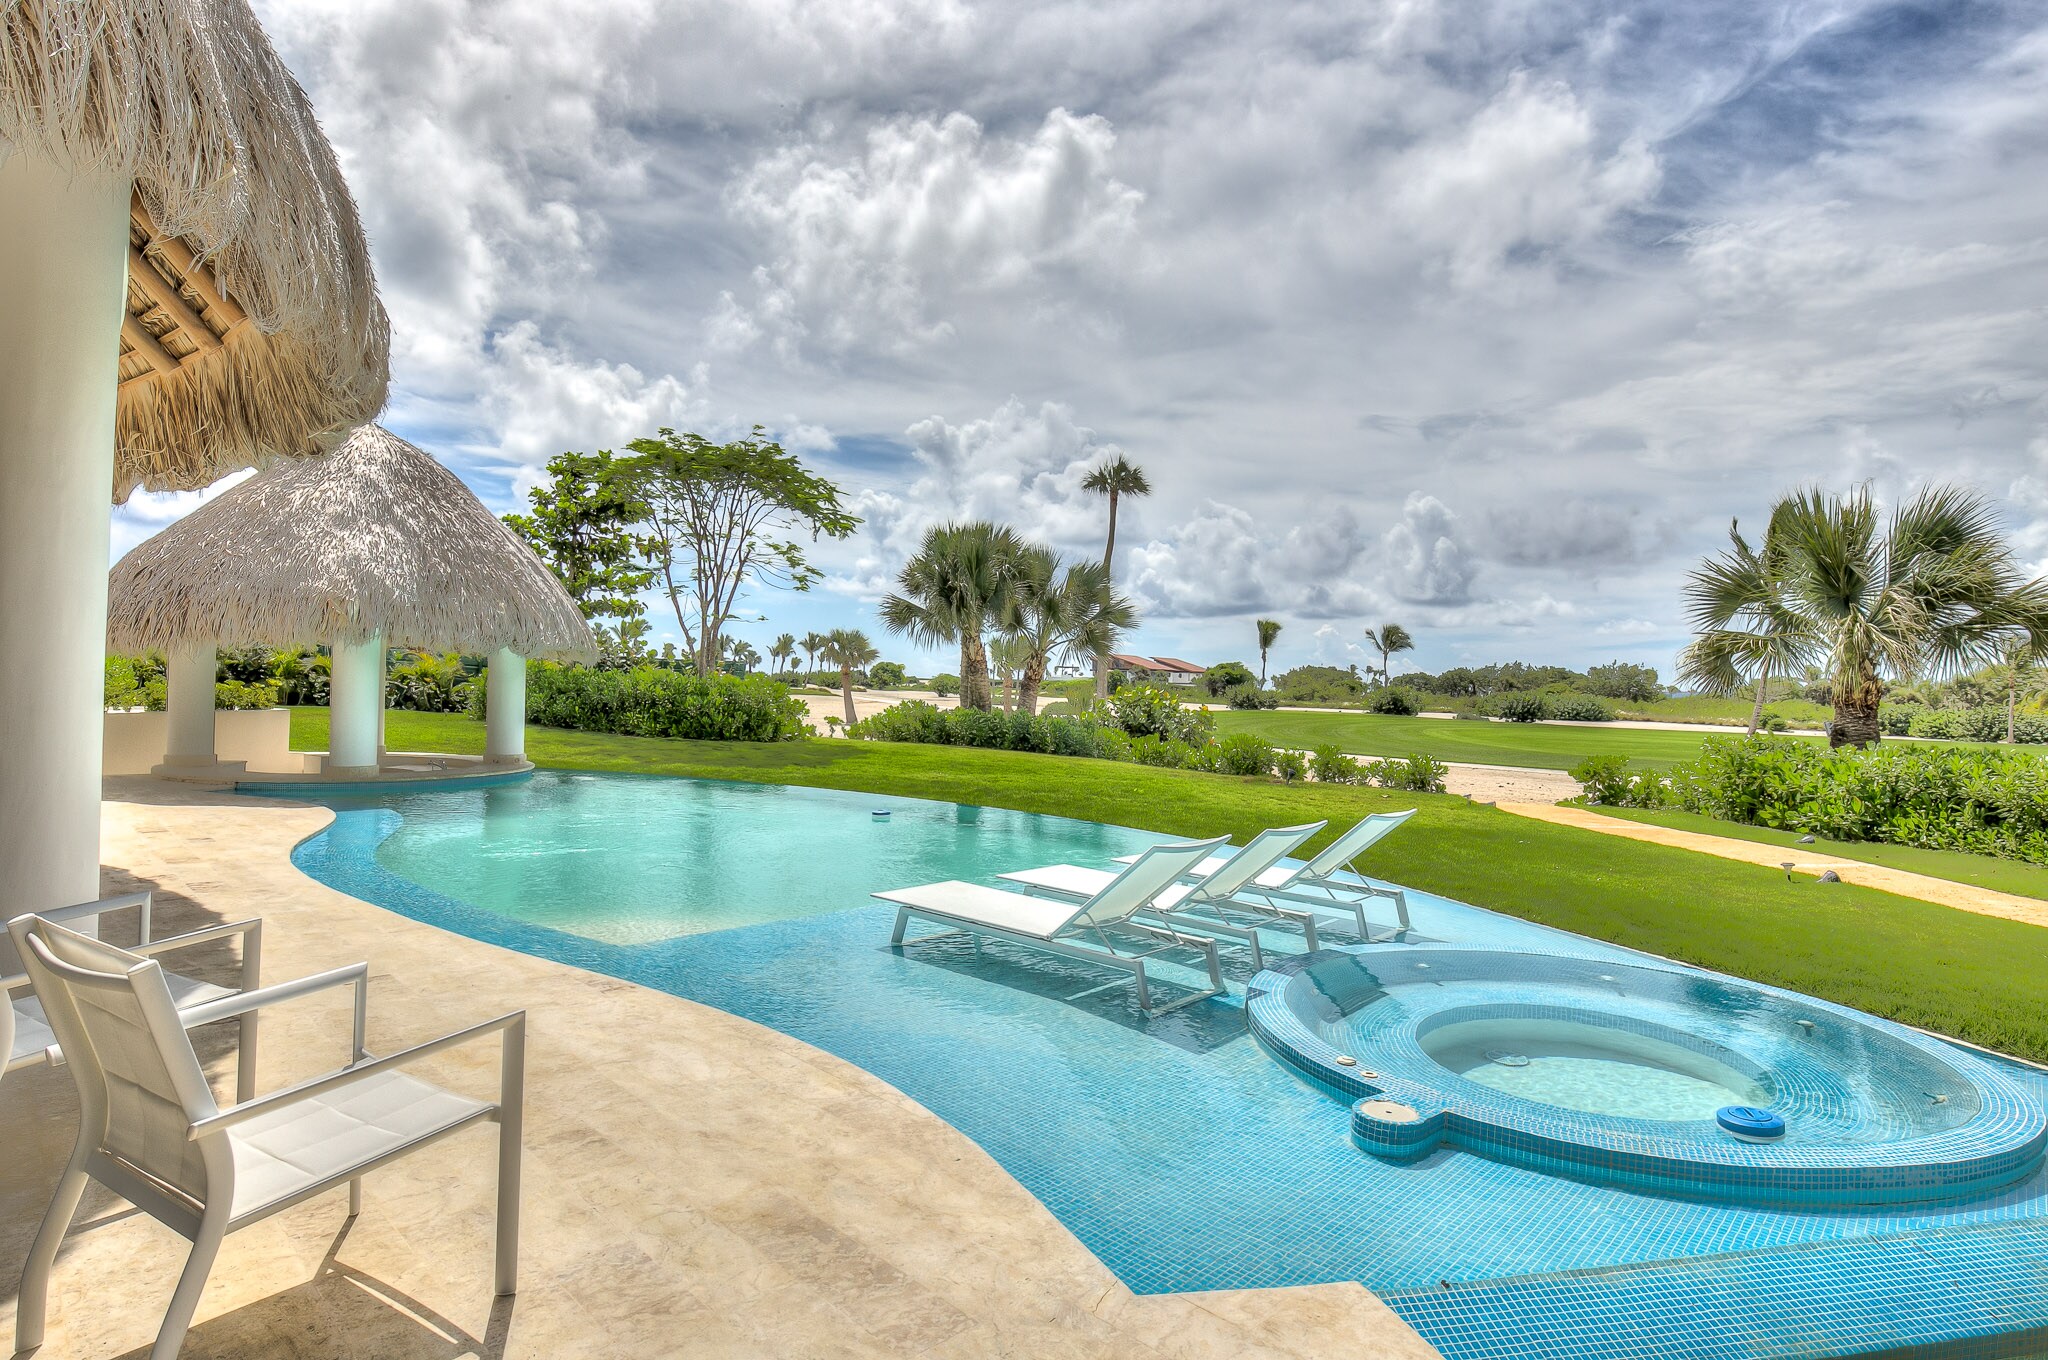 Property Image 1 - Dazzling Villa with Marvelous Pool close to the Beach